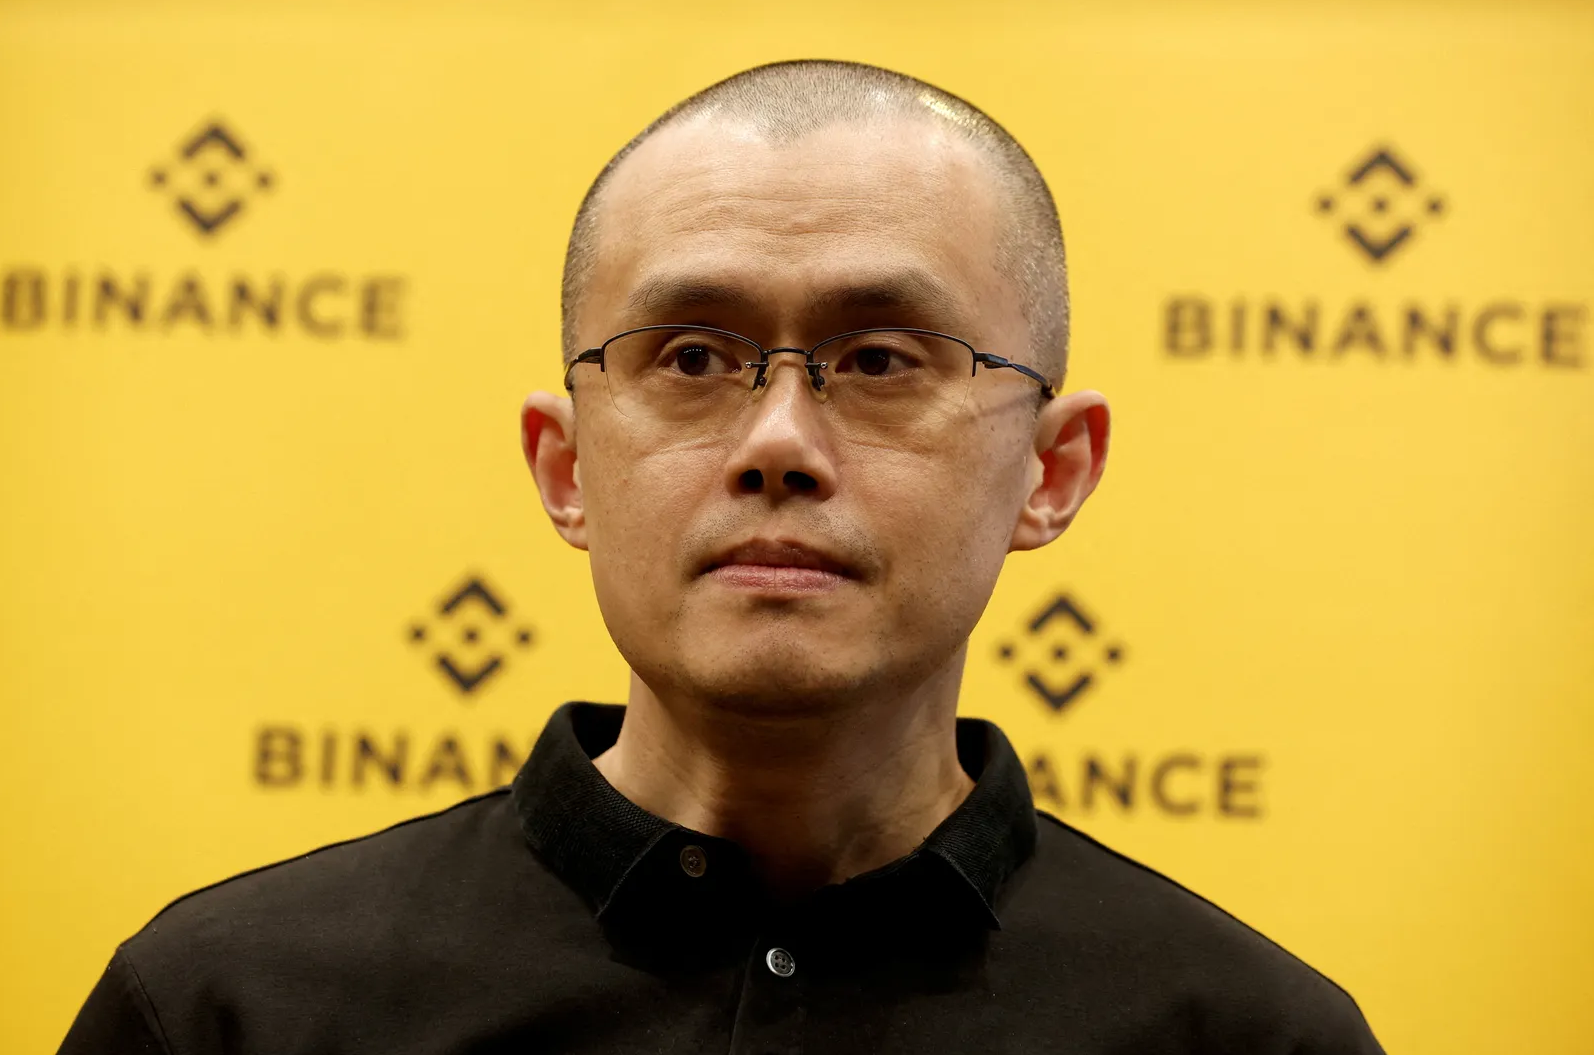 Changpeng Zhao, SEC's crypto enemy number 1